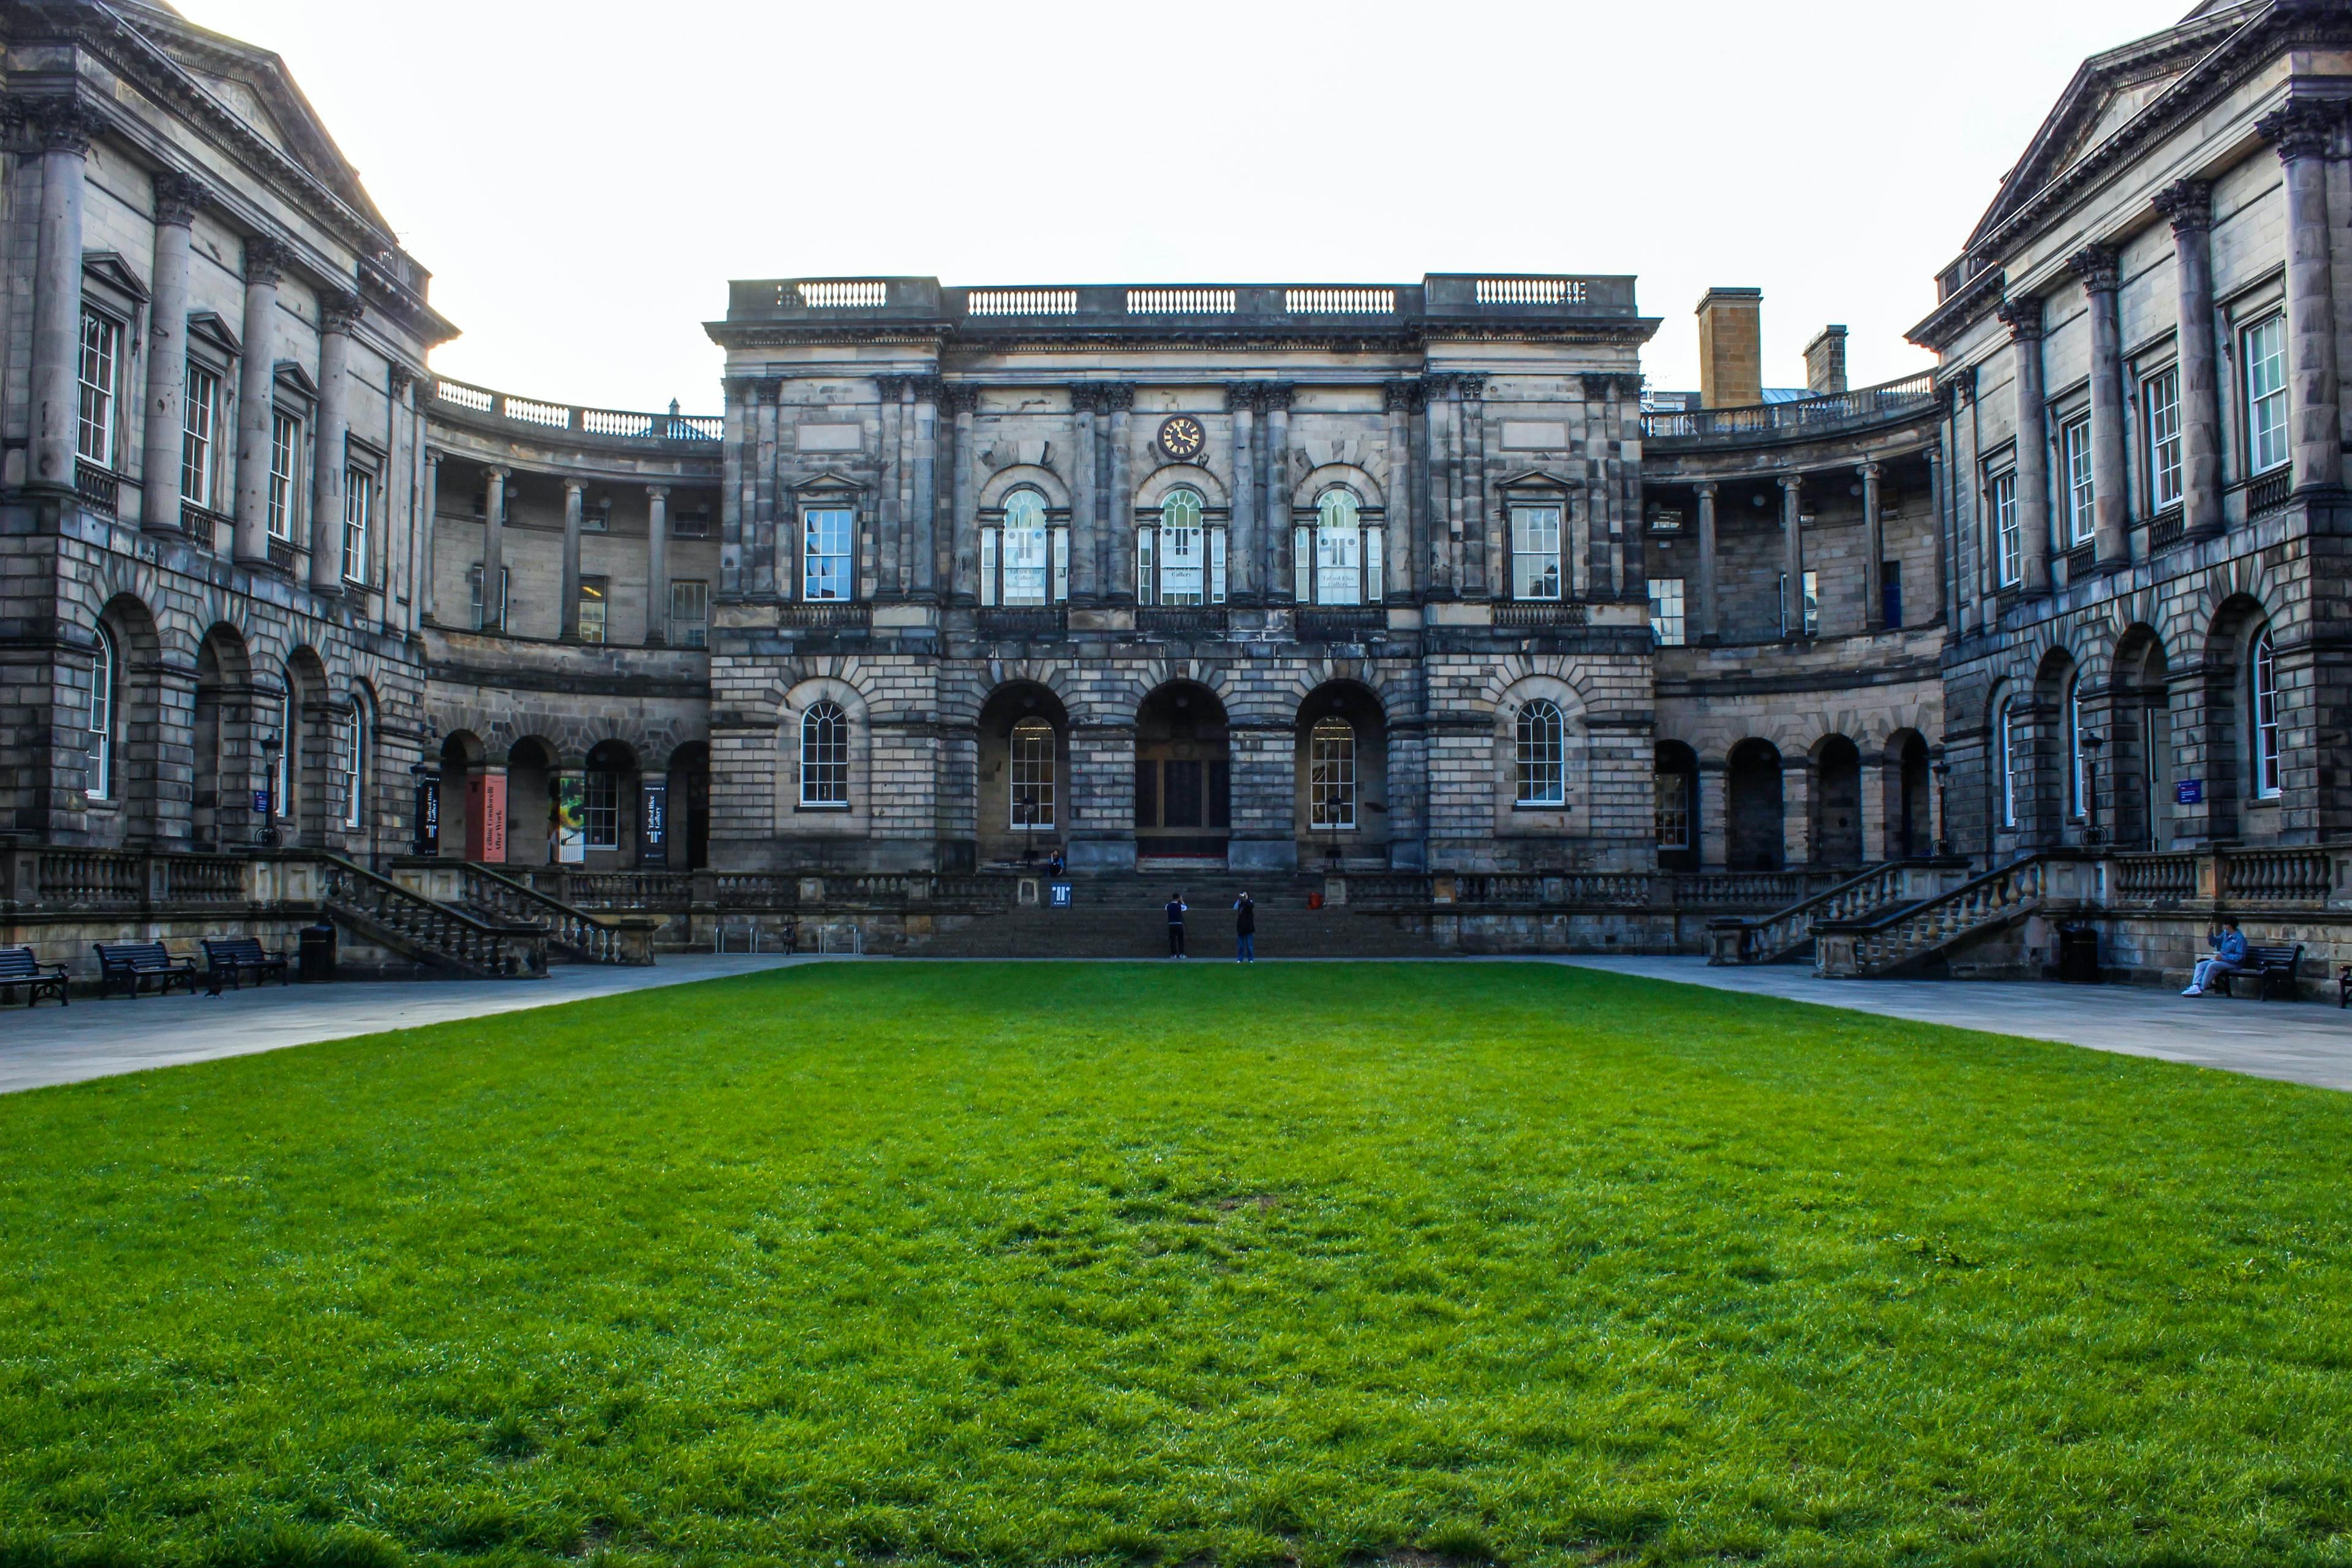 How to get into the University of Edinburgh from the US